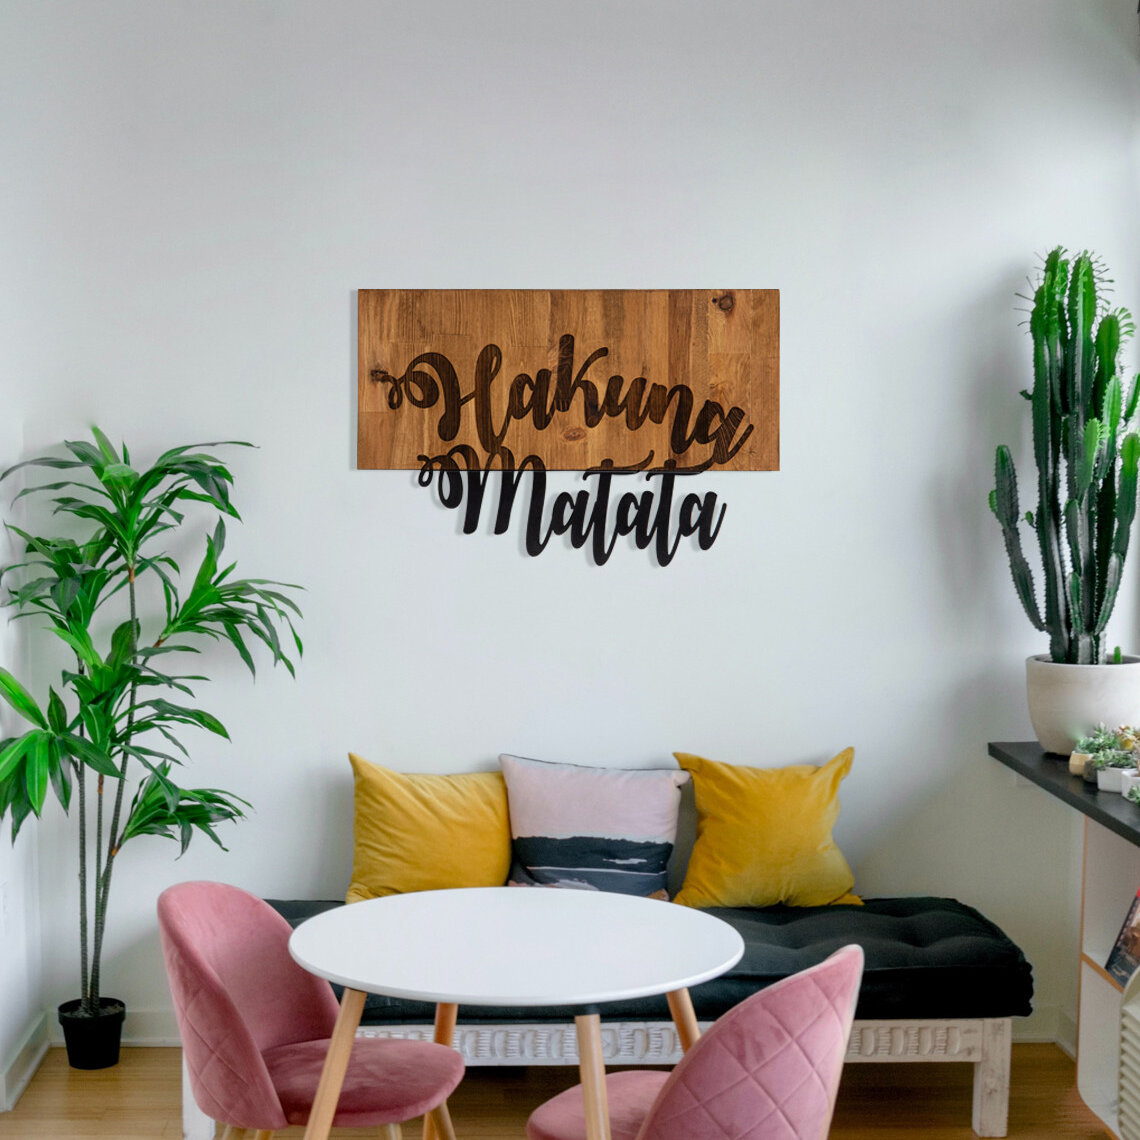 Bless international Solid Wood Text Wayfair & Decor Wall | Numbers